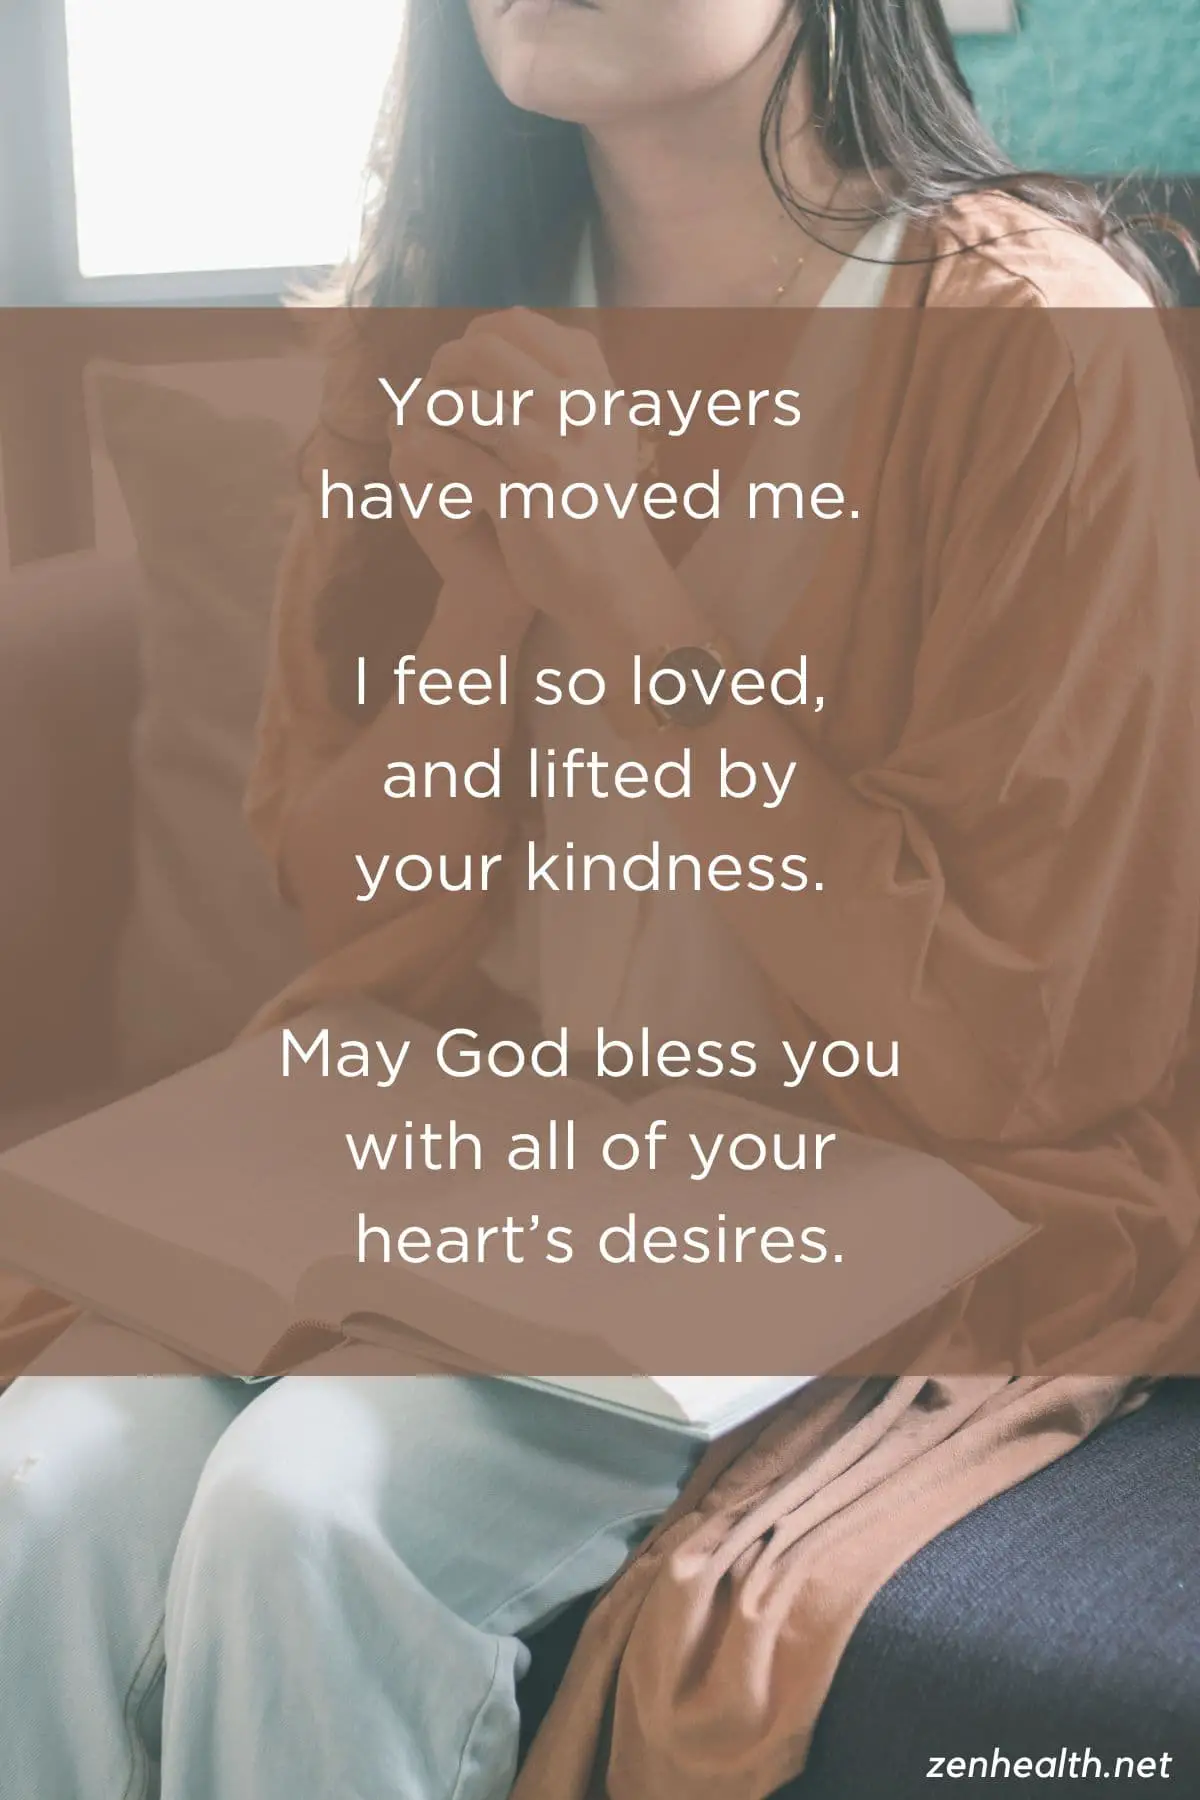 Your prayers have moved me. I feel so loved, and lifted by your kindness. May God bless you with all of your heart's desires text overlay on an image of a woman sitting and praying with a religious text on her lap